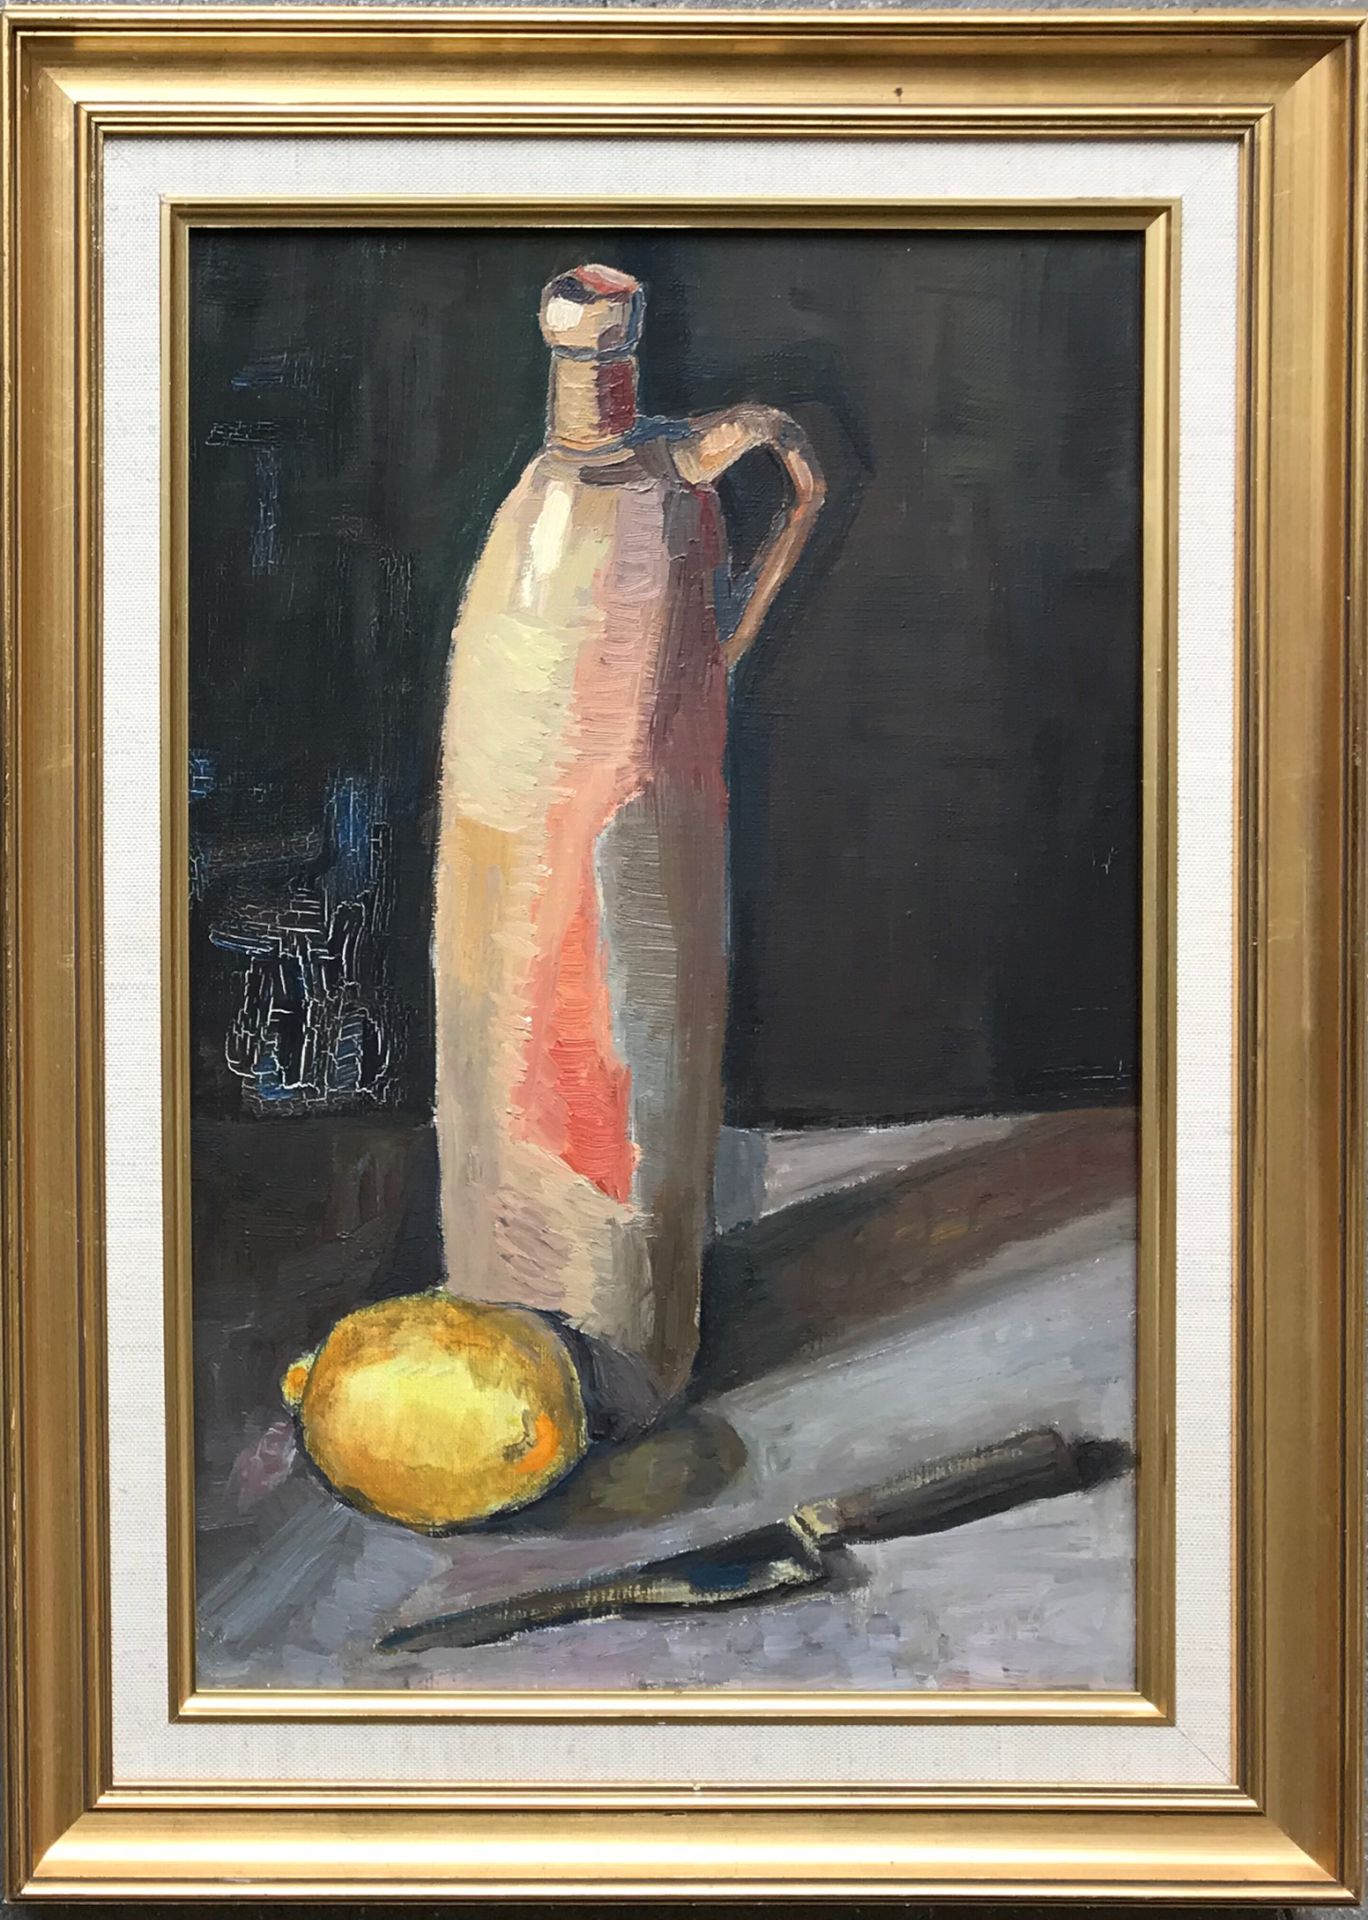 MODERN SCHOOL 
Still life with pitcher, lemon and knife 
Oil on canvas 
40 x 26 &hellip;